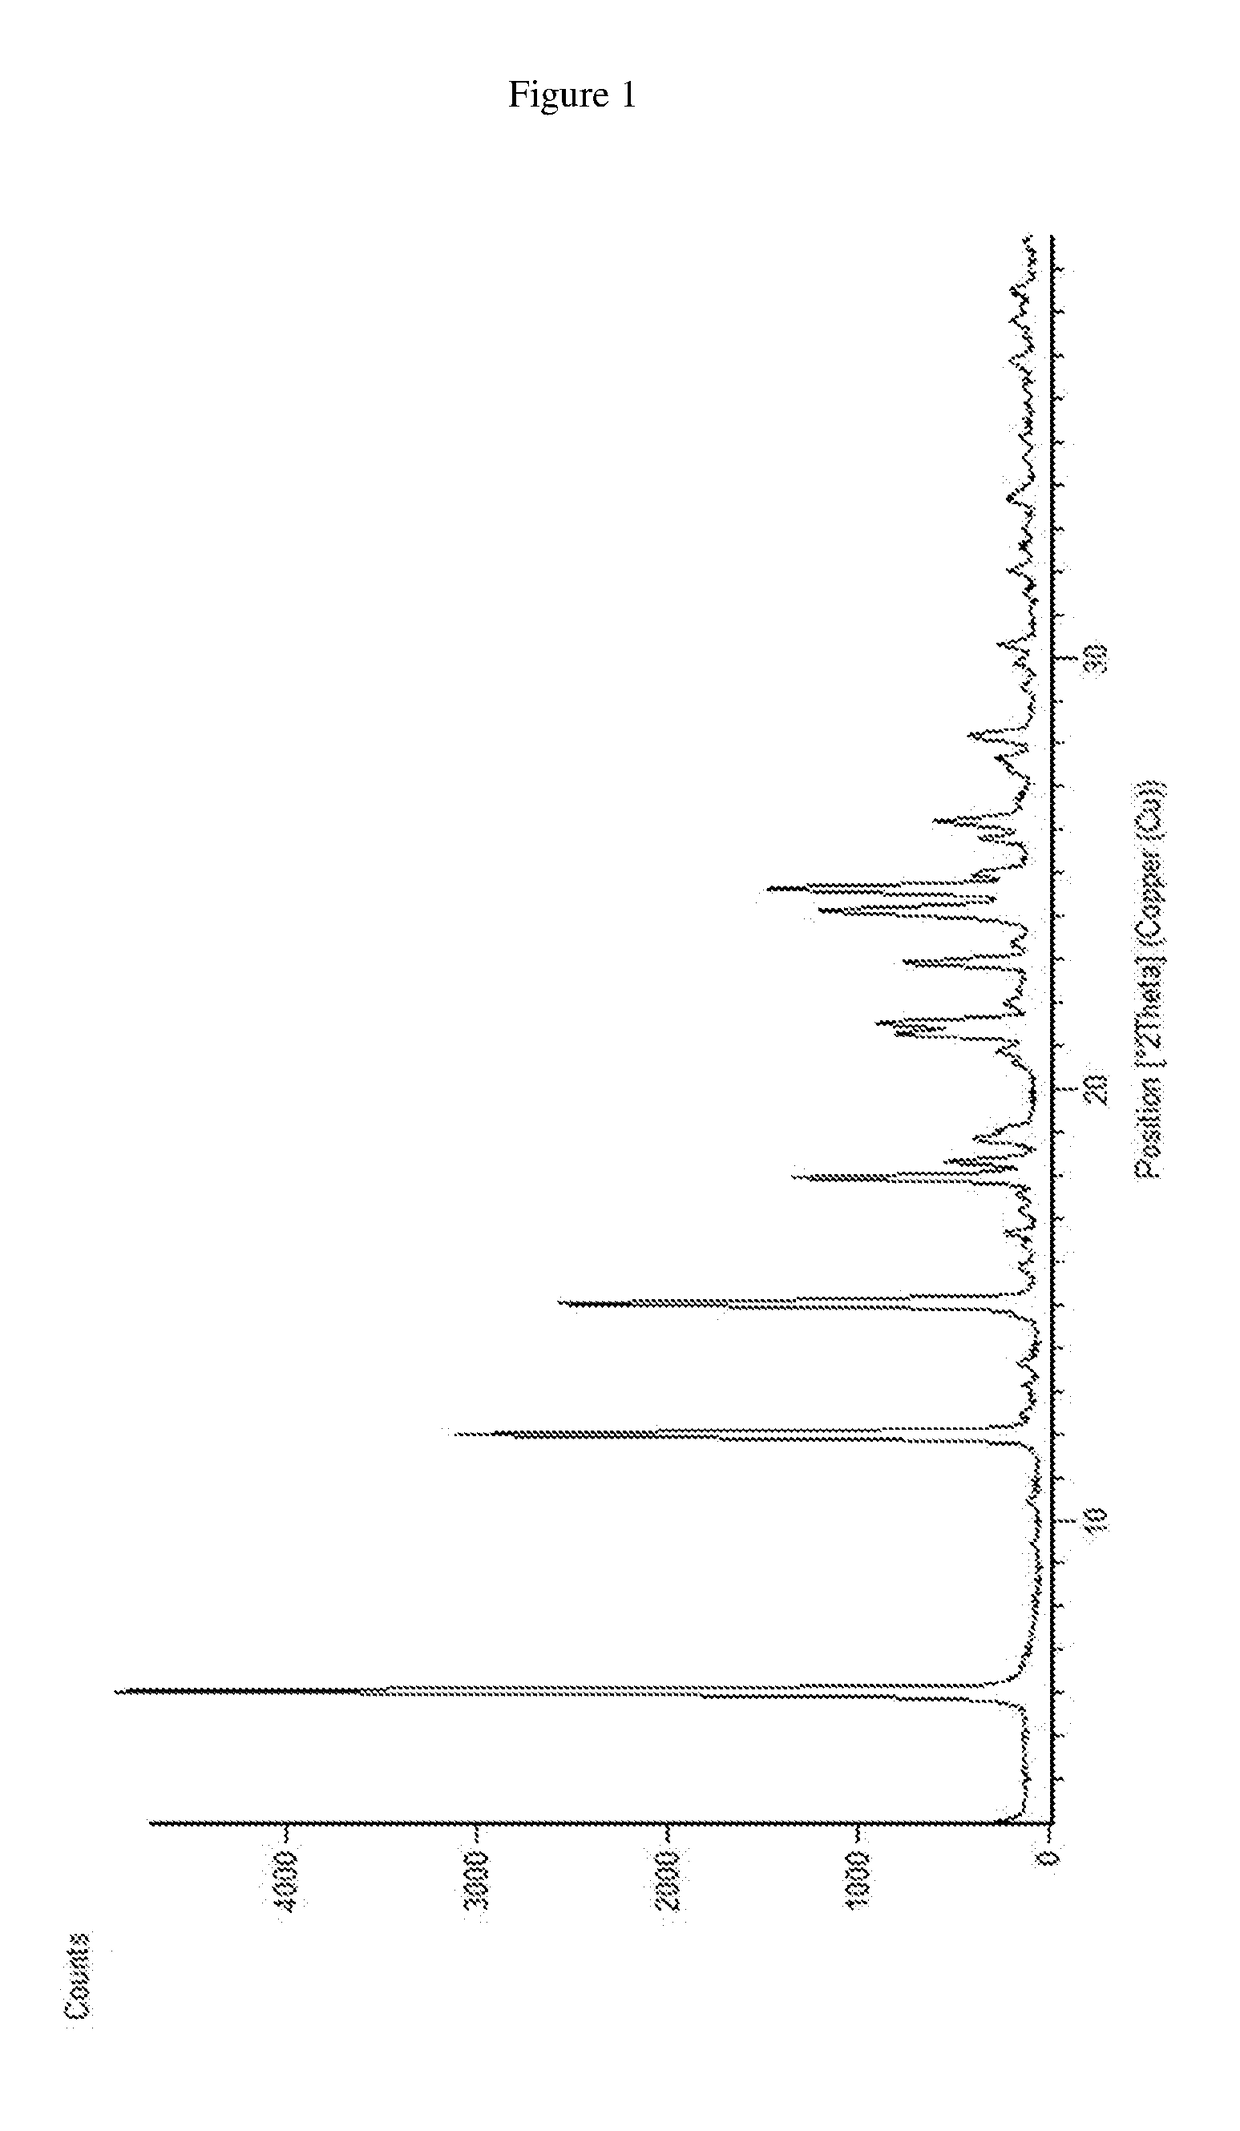 Solid state forms of dasatinib and processes for their preparation